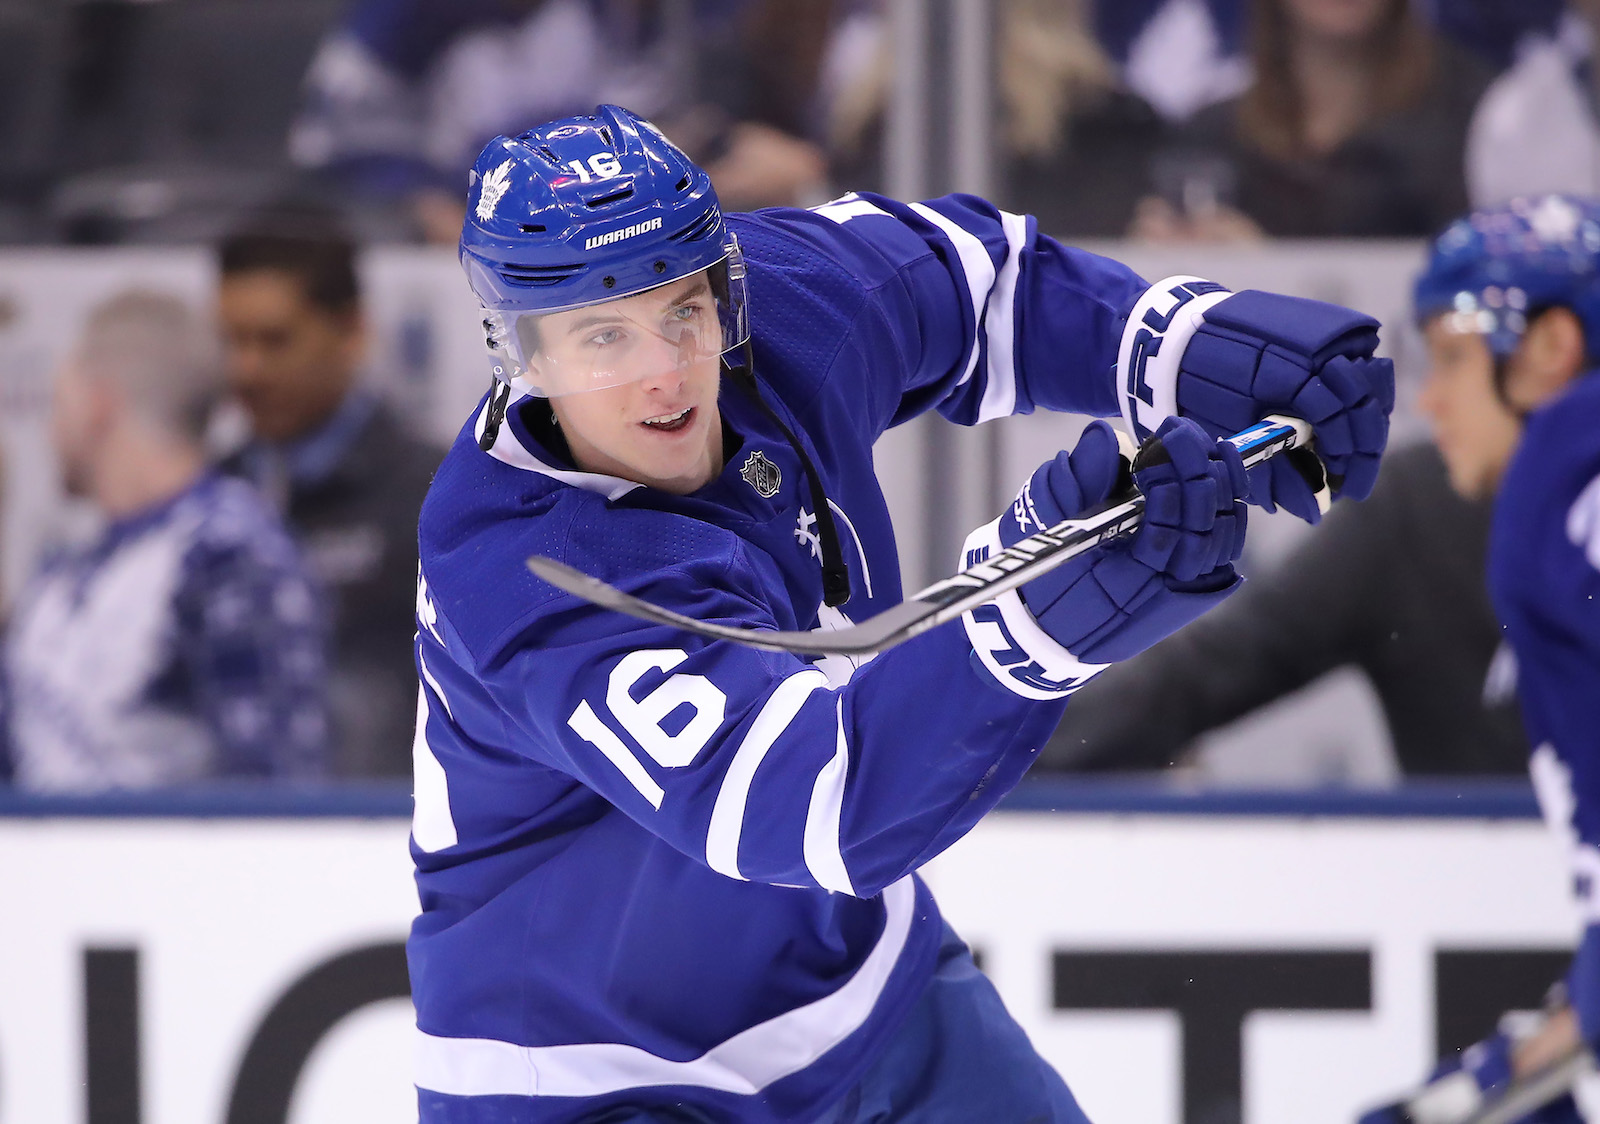 Marner knows Leafs in for tough series with Blue Jackets